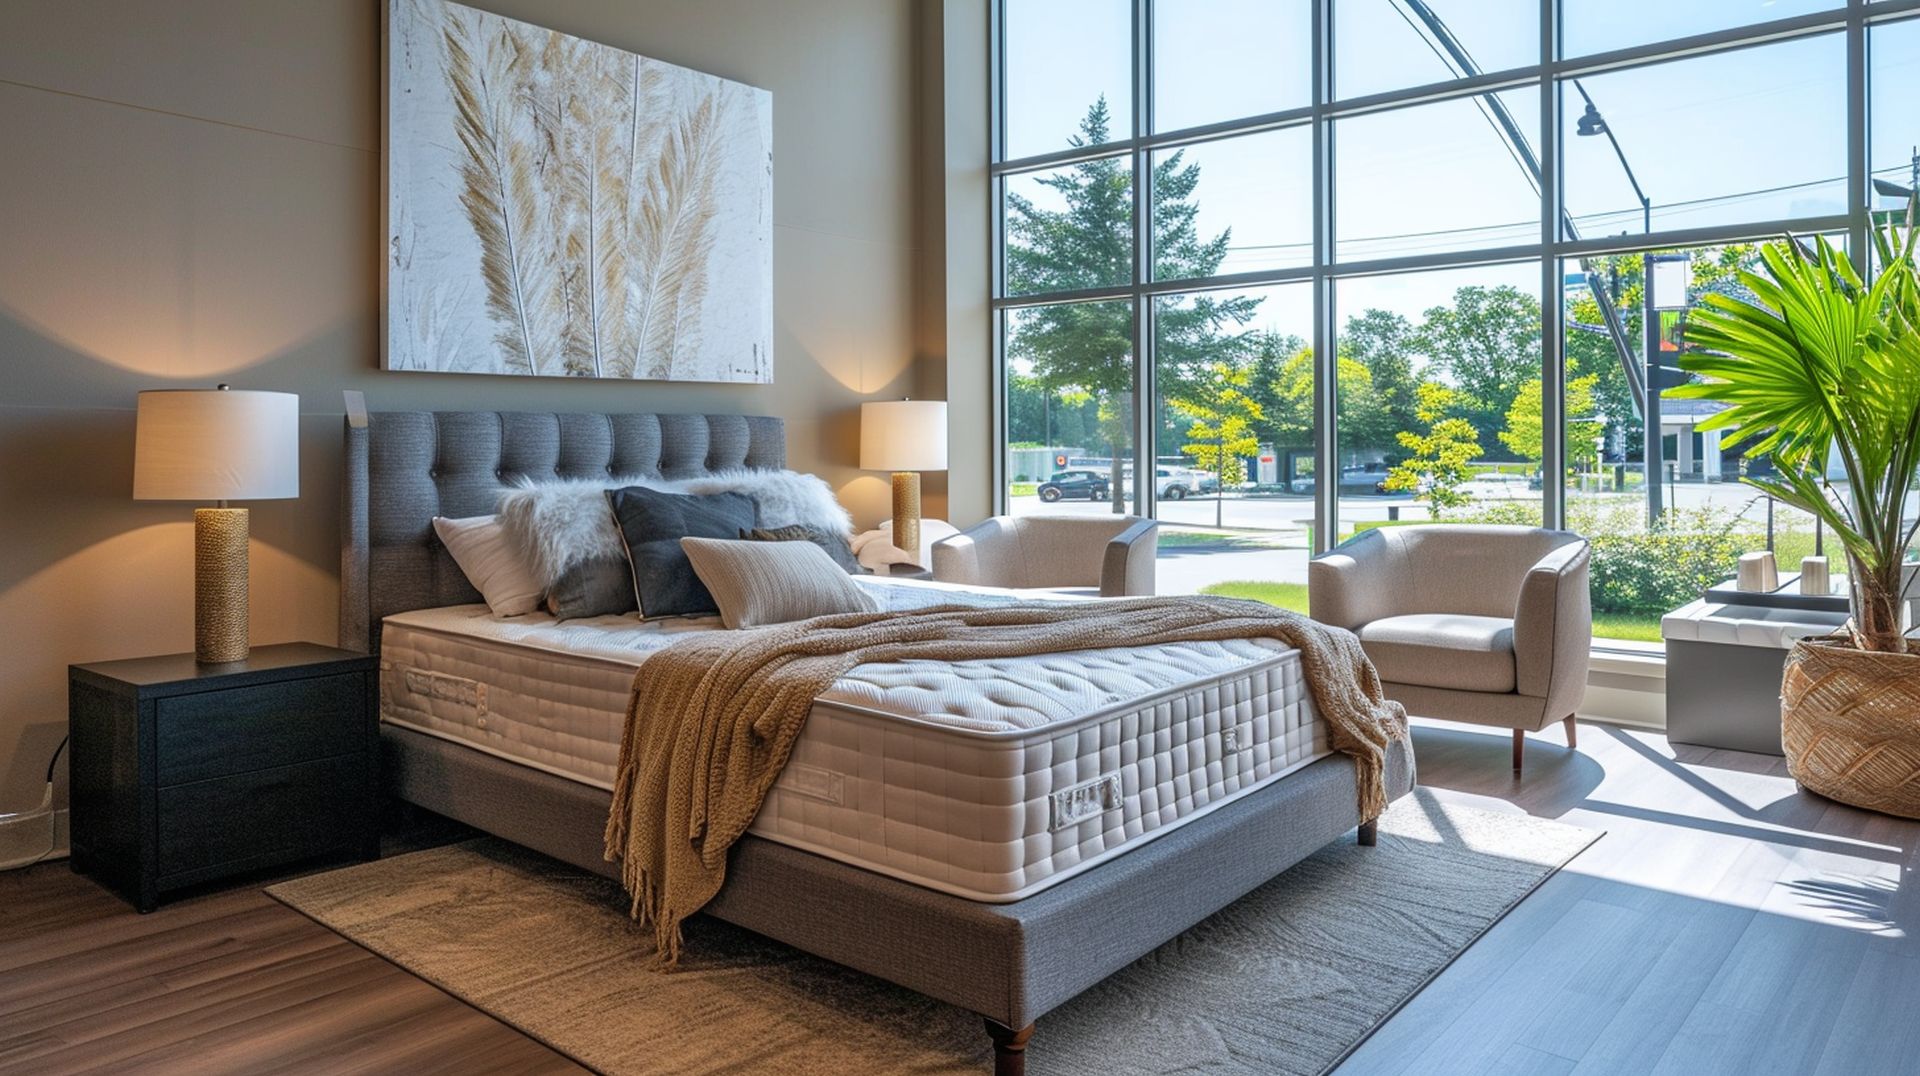 Local Grand Island mattress stores have the best prices, sales, and deals if you're looking for a new mattress in Grand Island